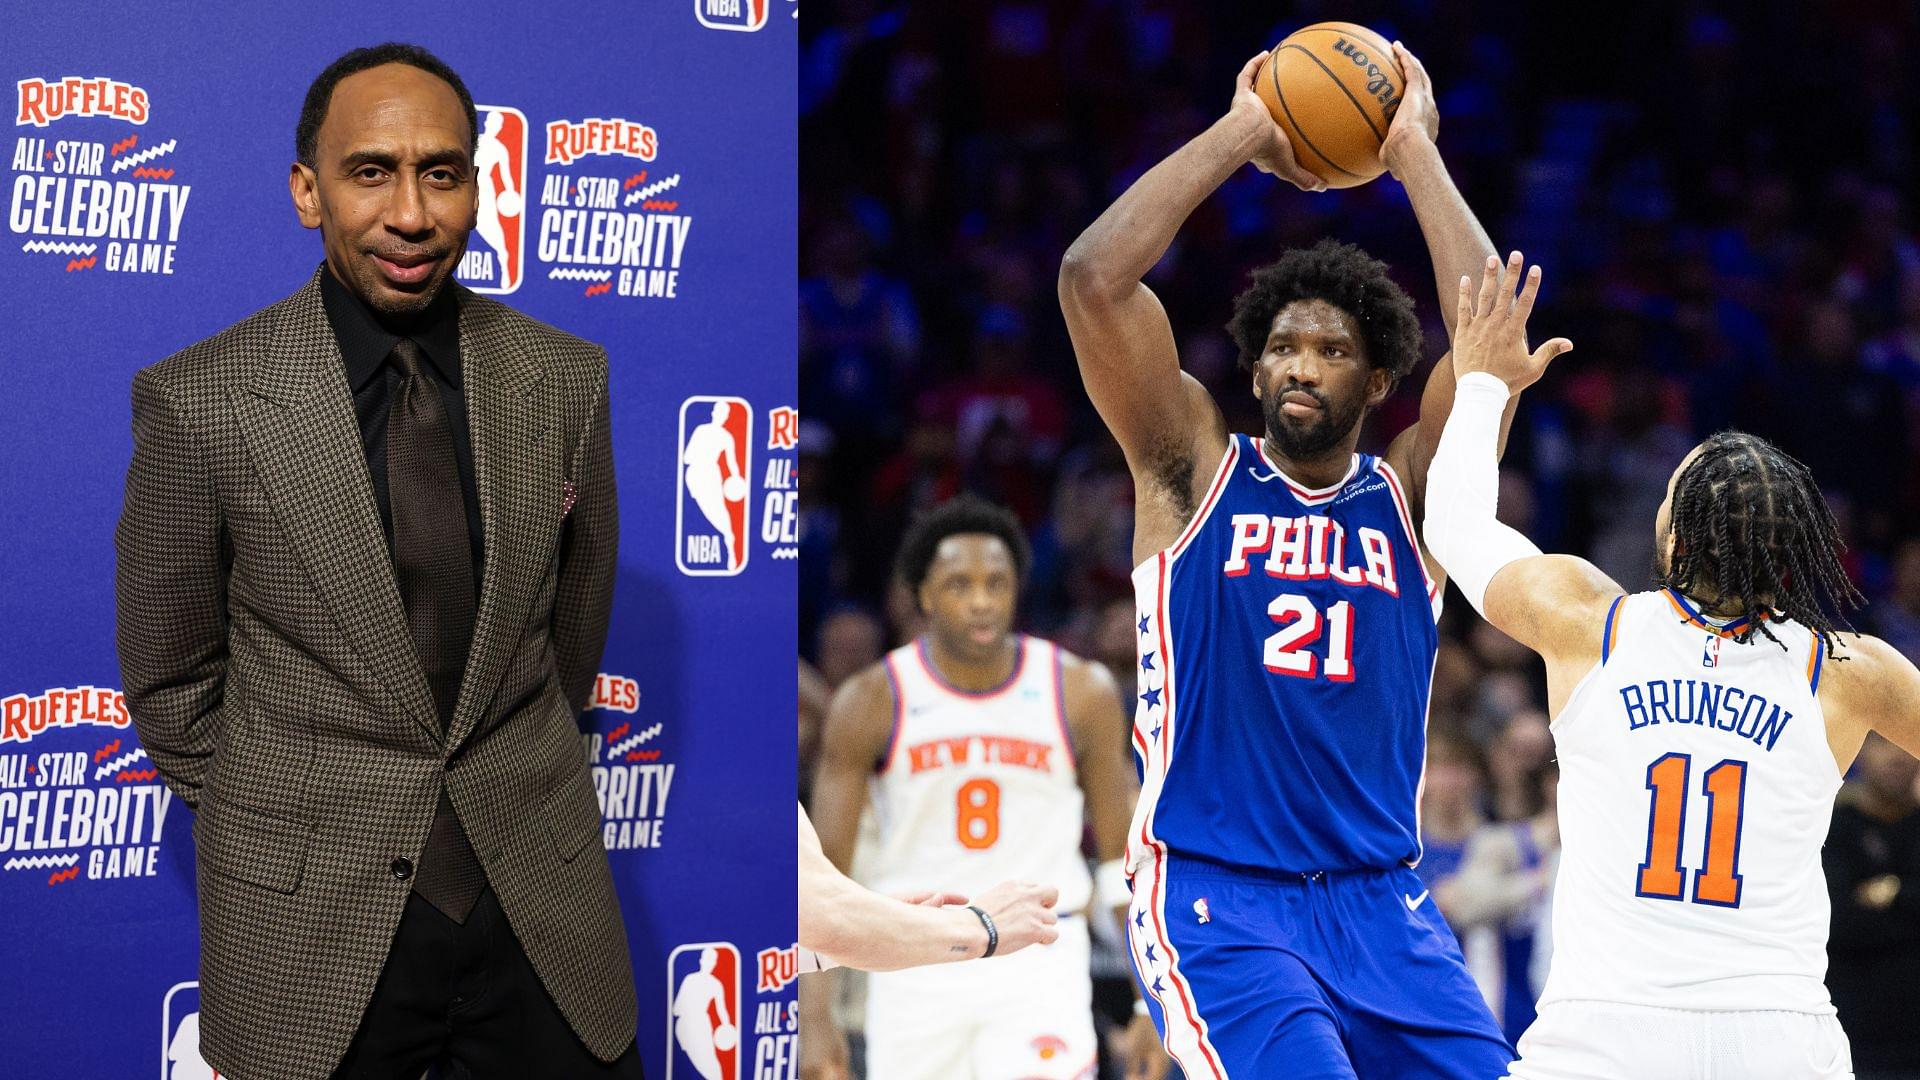 "He Can Do What He Wants": Knicks Super Fan Hypes Up 'Healthy' Joel Embiid As The Greatest Big Man Ever